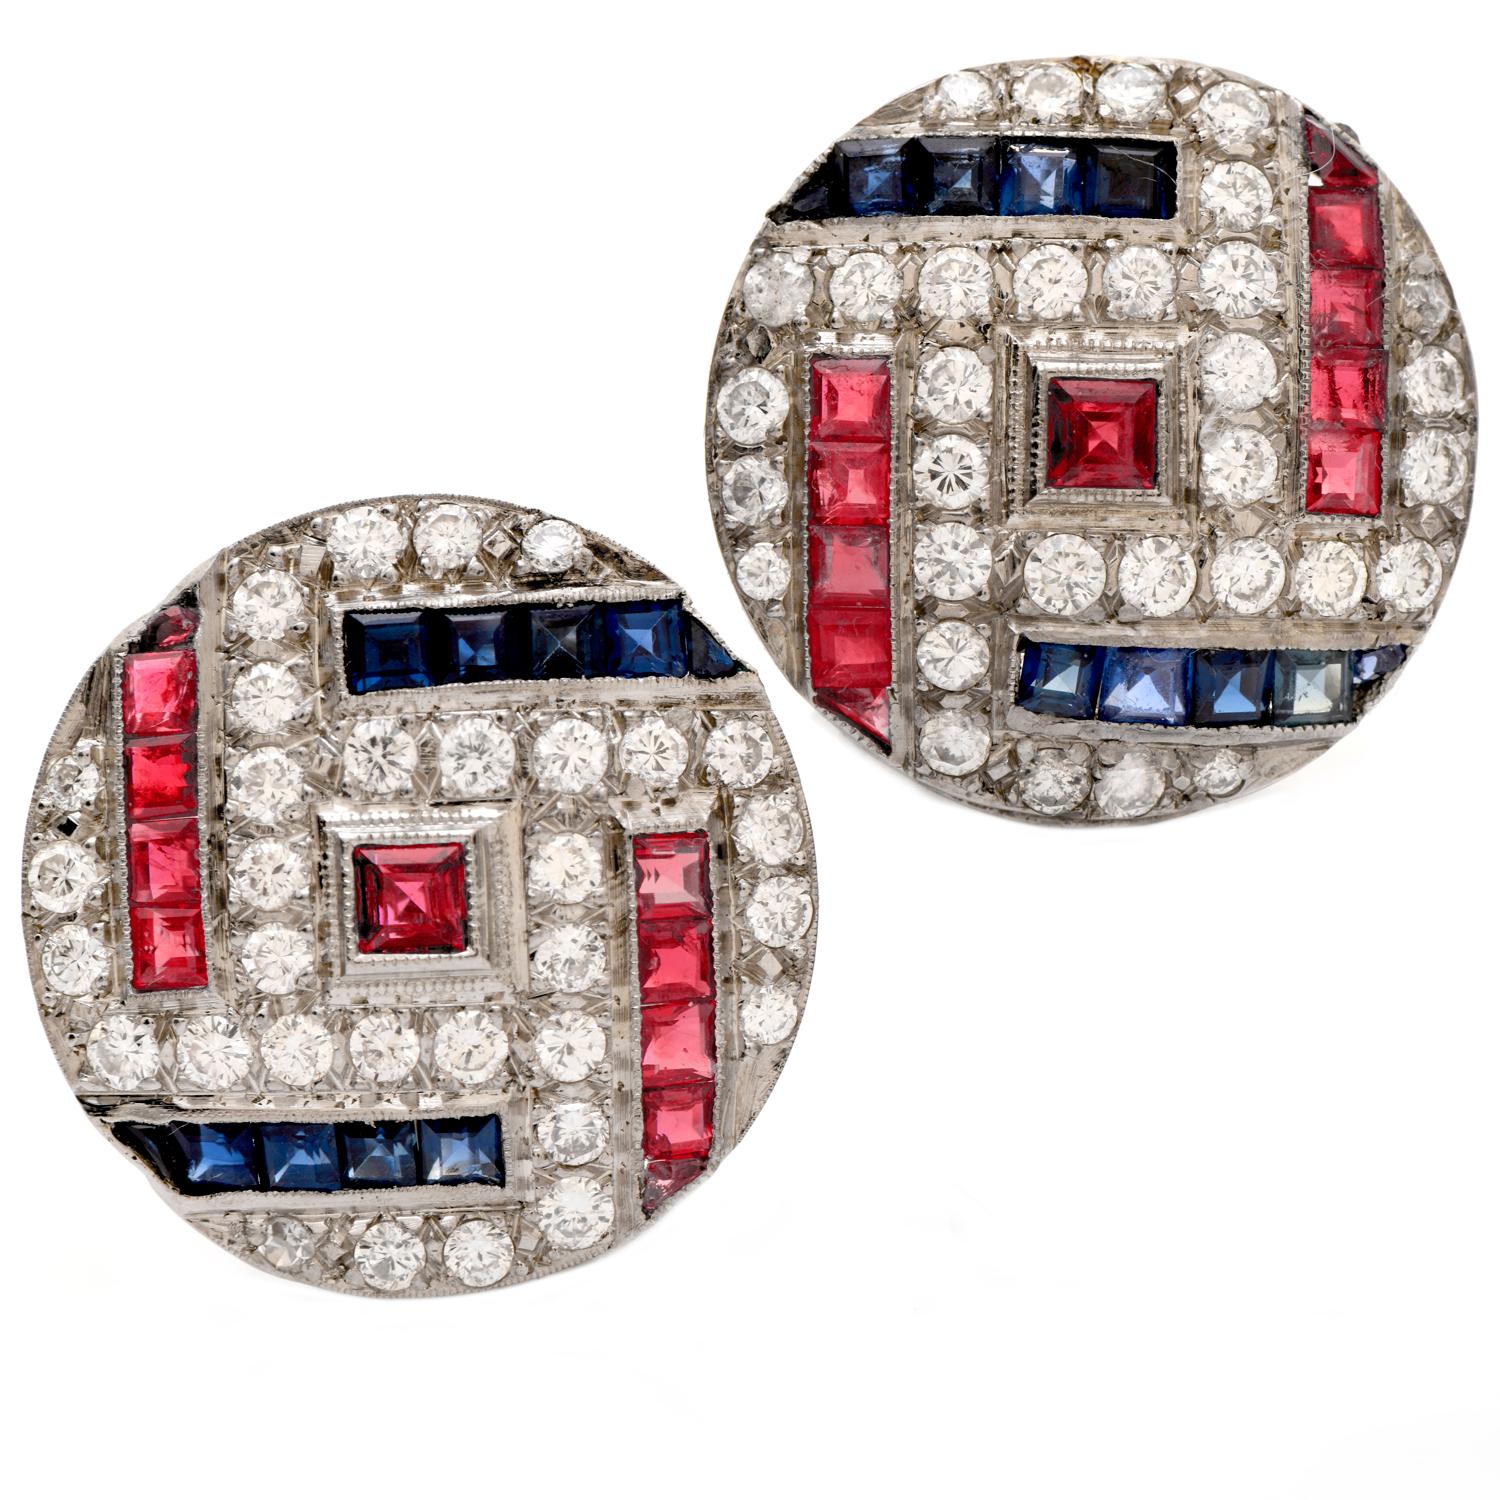 Vintage Sparkle & Elegance.

Celebrate America with these beautiful round earrings that offer bright contrasting

colors of white and ruby red with a dash of blue sapphire.

Crafted in Solid Platinum,

 (62) round-cut Genuine Diamonds run throughout